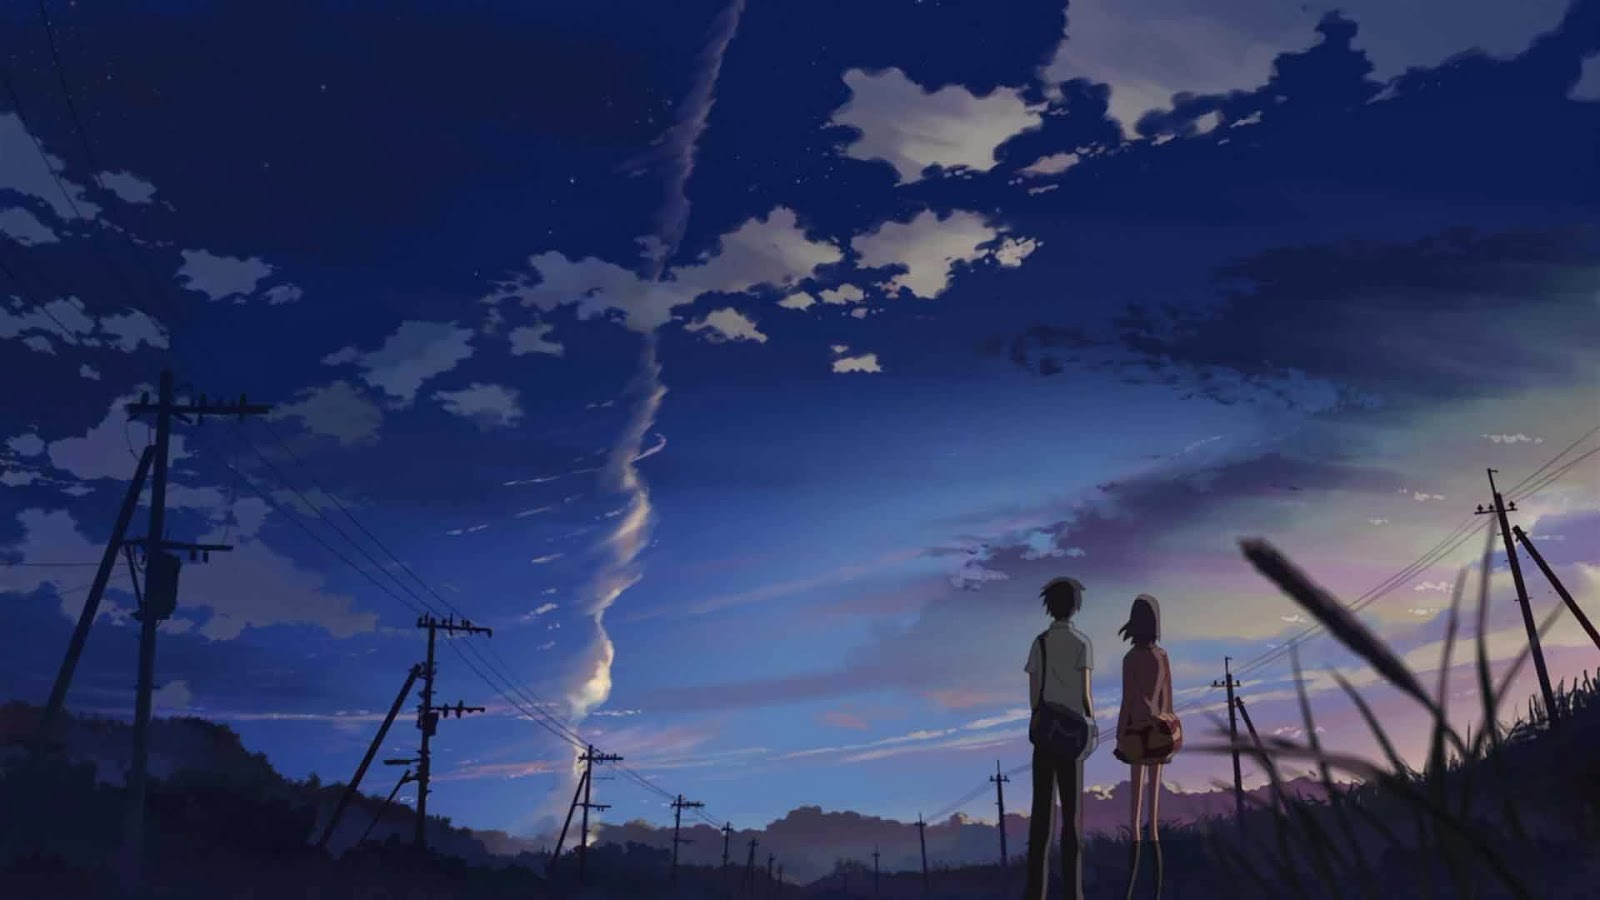 Hd Wallpapers Blog: 5 Centimeters Per Second